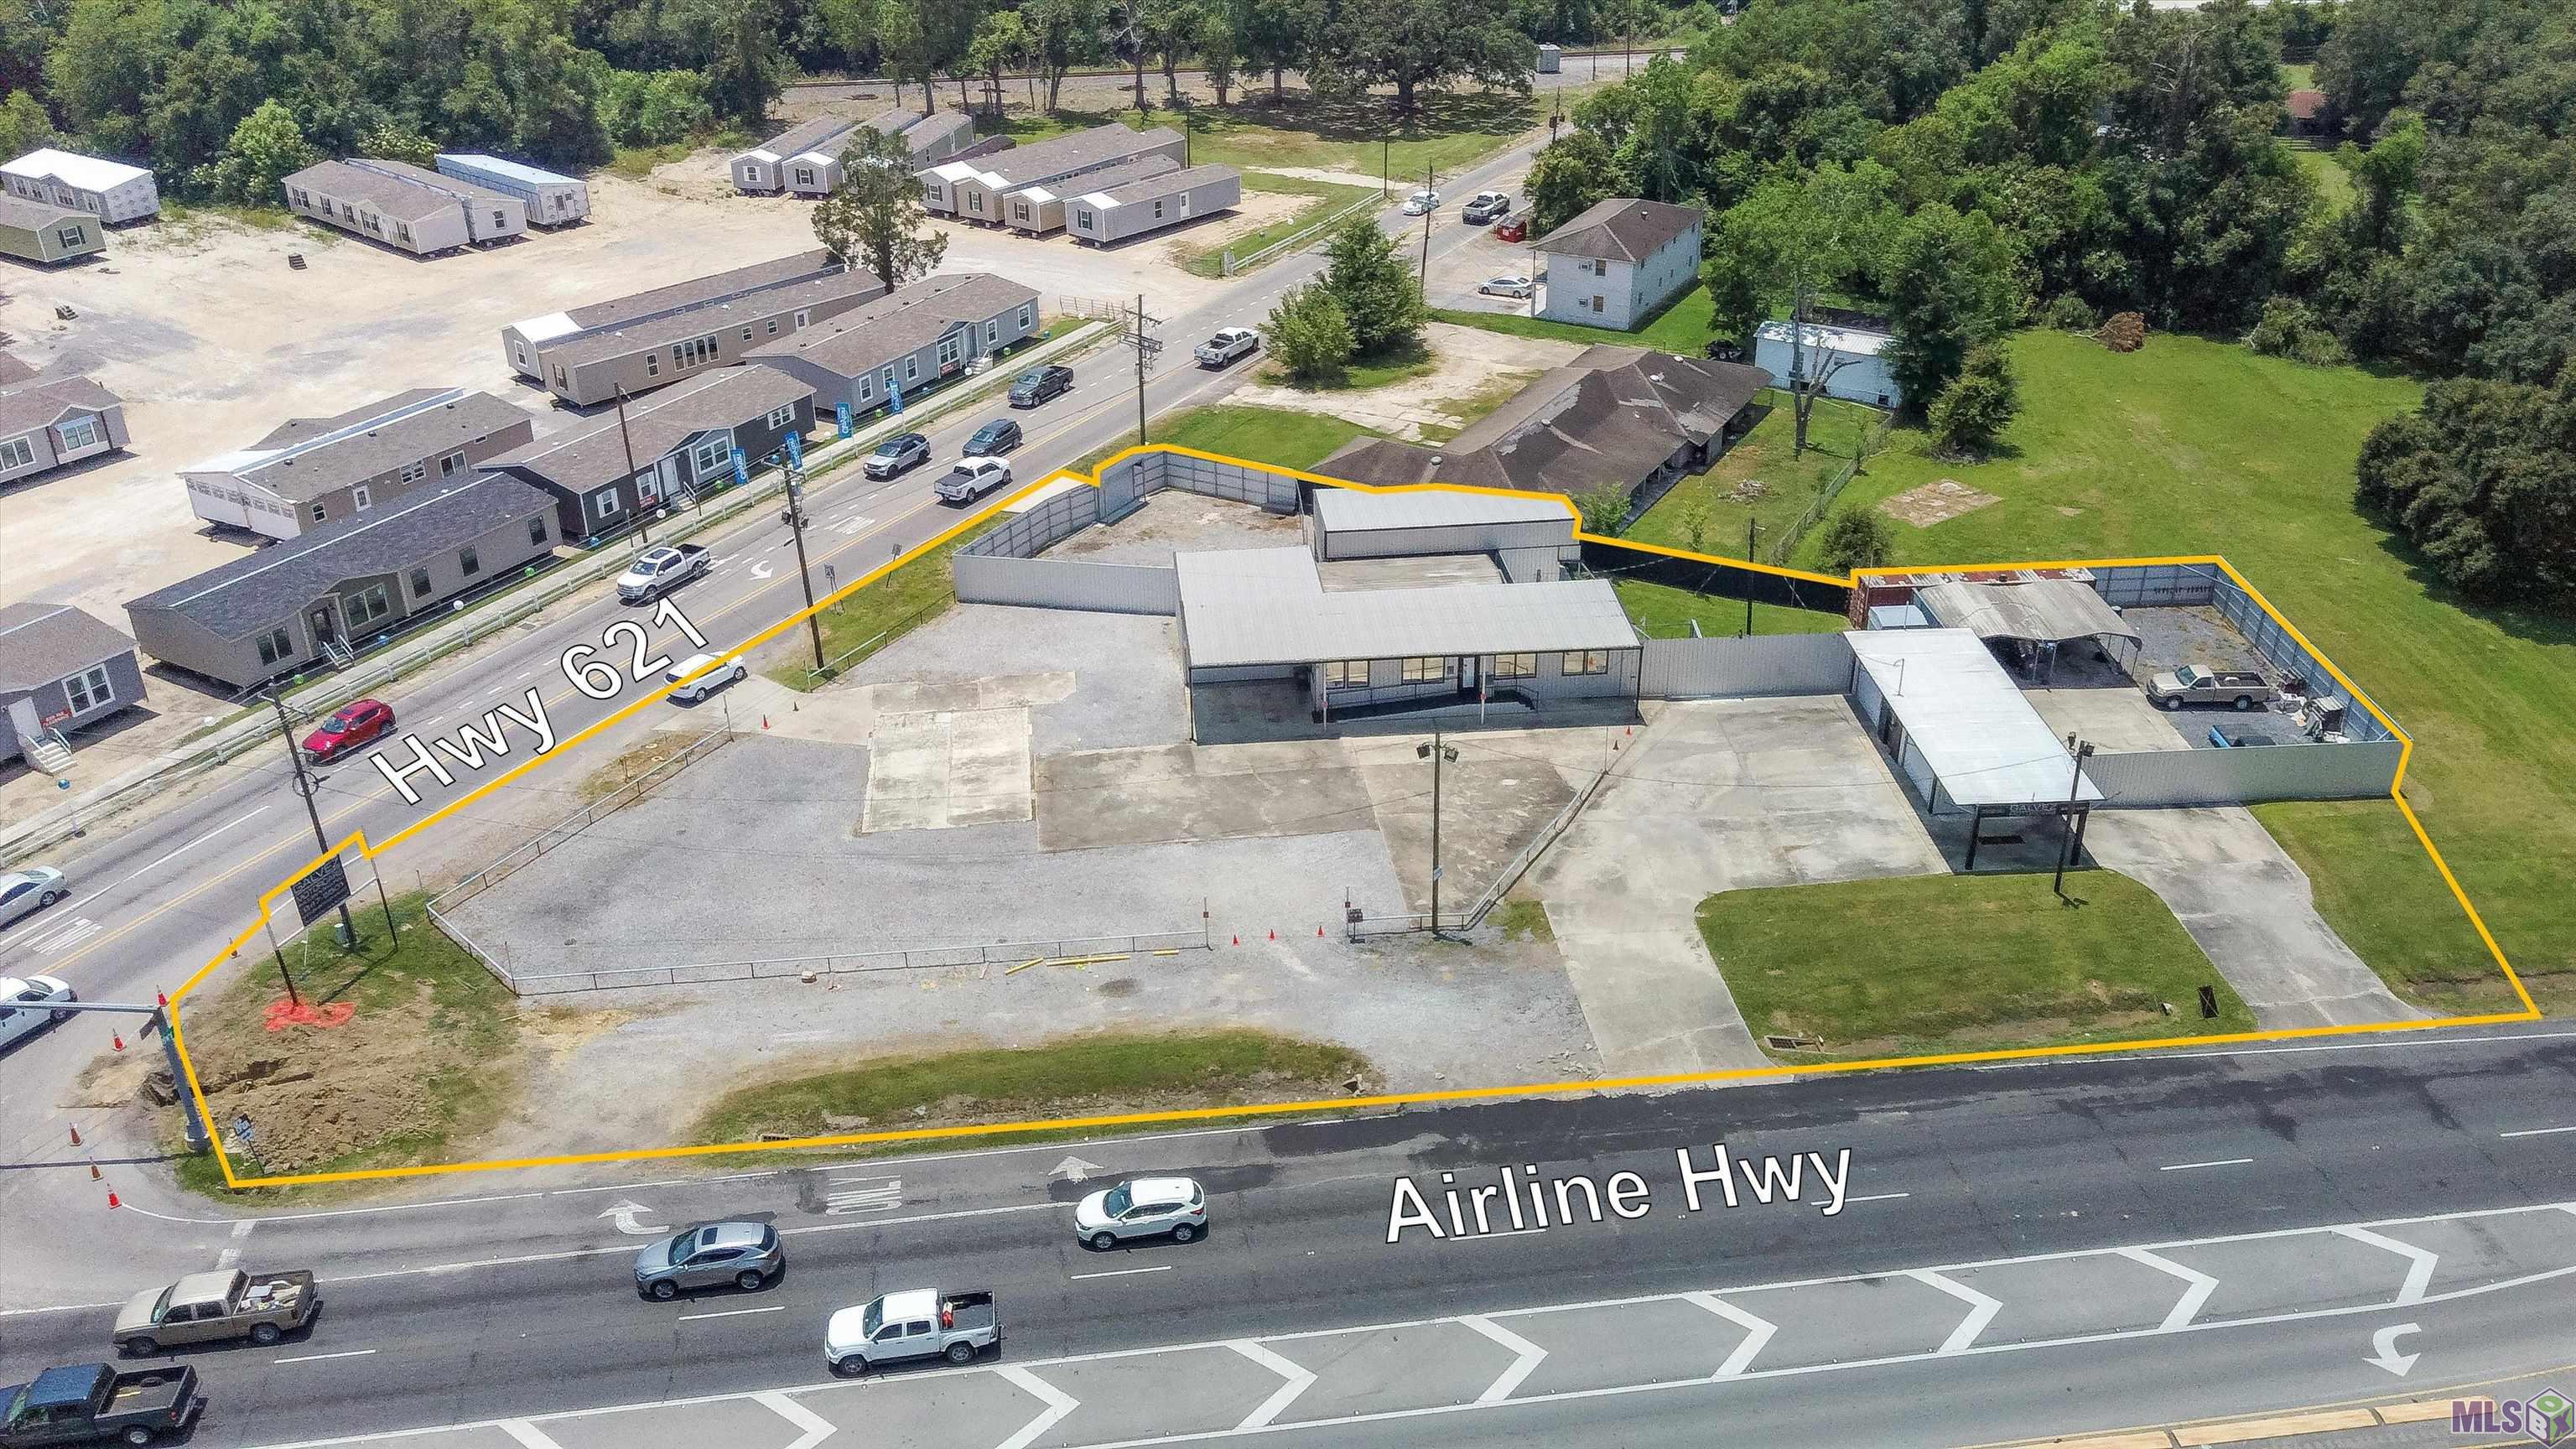 JUST REDUCED ON THIS INCREDIBLE LOCATION !!  Established automotive corner lot location in prime Gonzales area at Airline Hwy and Hwy 621 includes two lots including a previous car sales lot and automotive car wash. This property includes a double commercial lot of 1.33 acres. The 600 sq. ft. office with accessible ramp includes a private office, open sales staff area, bathroom, and lounge area. Several storage bins (374 sq. ft.) plus a 758 sq. ft. huge garage area provides ample space for inventory/parts. A large camper port extends 682 sq. ft., and the camper provides additional staff accommodations. Multiple car wash bays and carports are ideal for potential repair, service, or detailing services. The incredible road frontage to two major highways will prove priceless for the large gravel and concrete staging lot for traffic sales. This location is one of a kind with endless business potential !